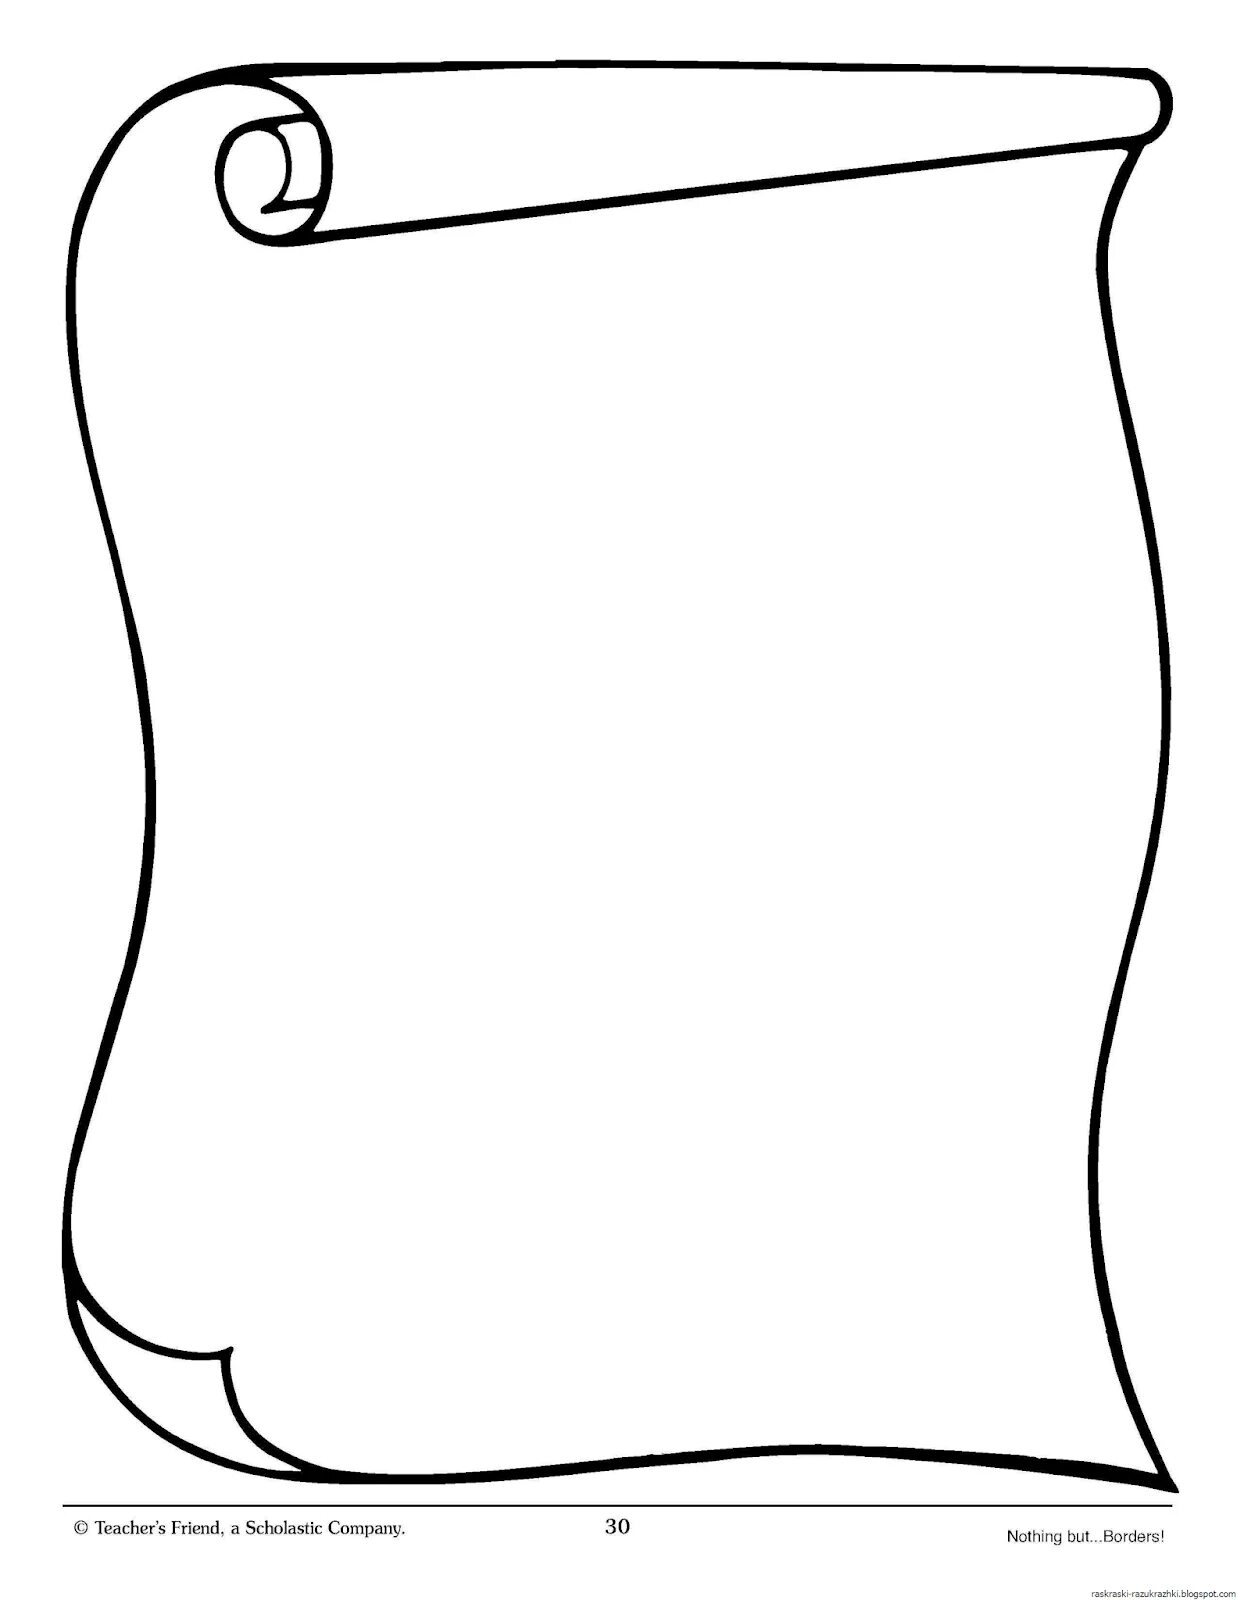 Color-filled blank coloring sheet